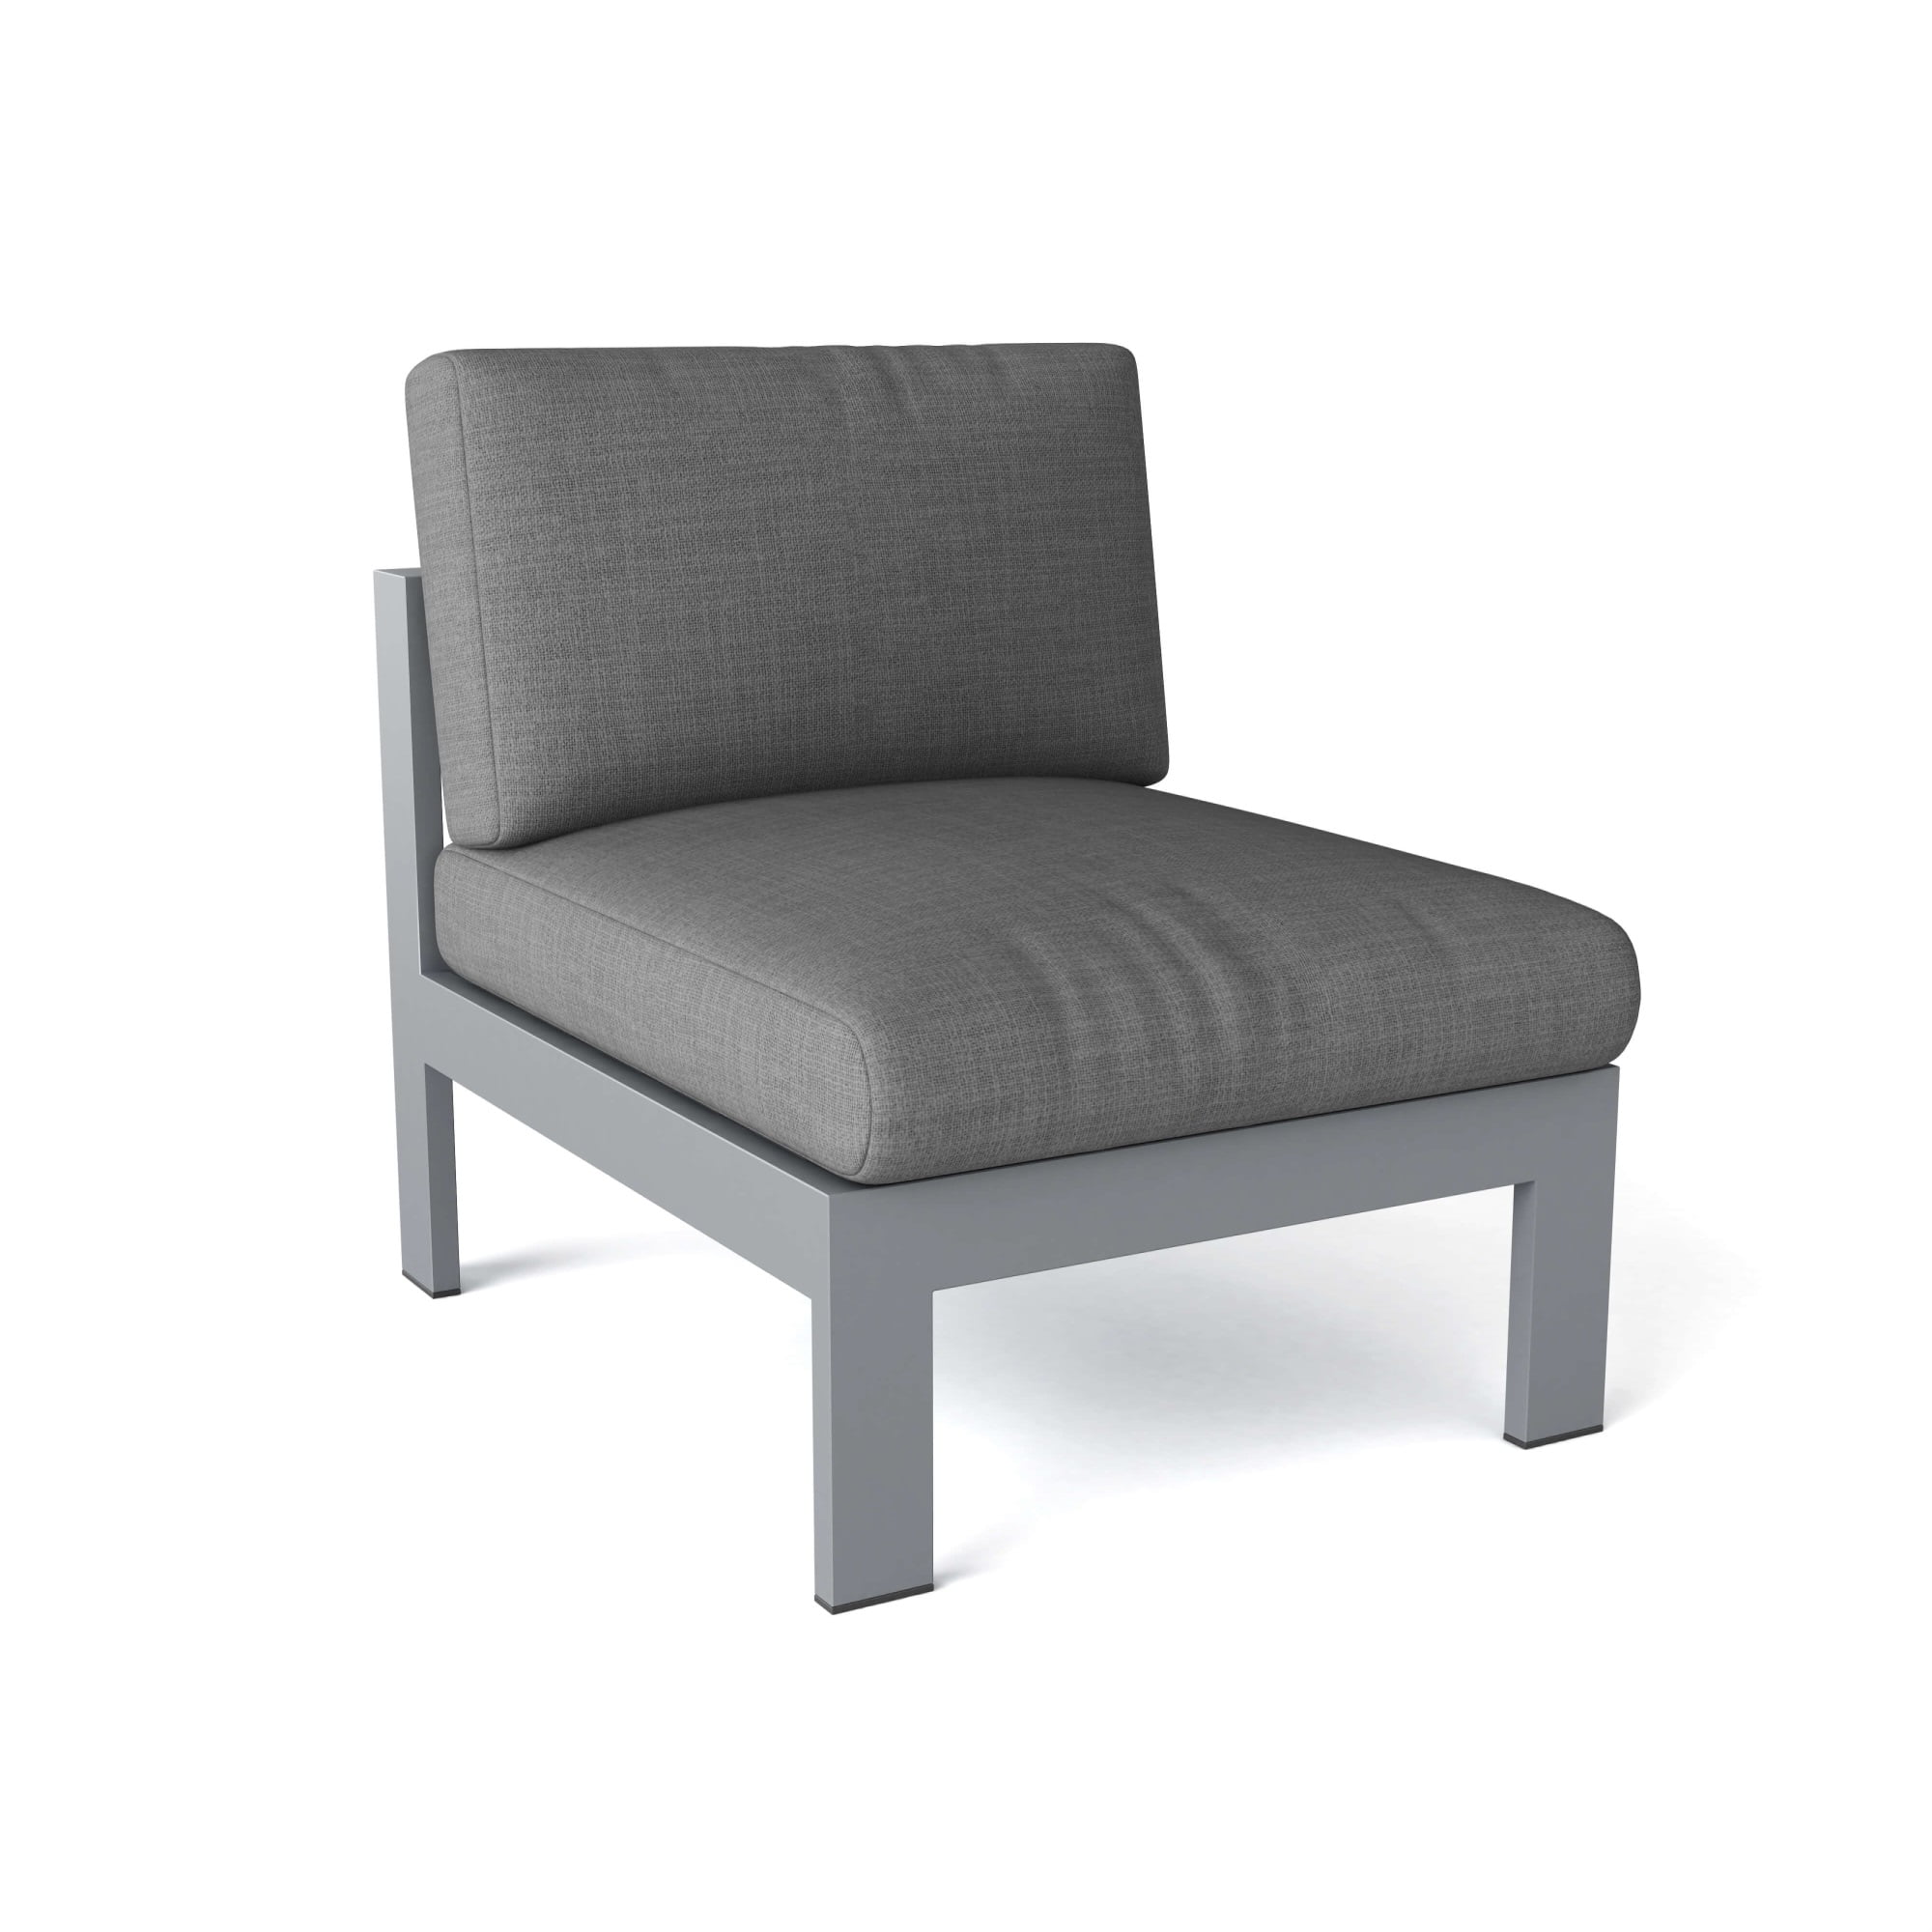 Ds-1002 Lucca Center Deep Seating Chair